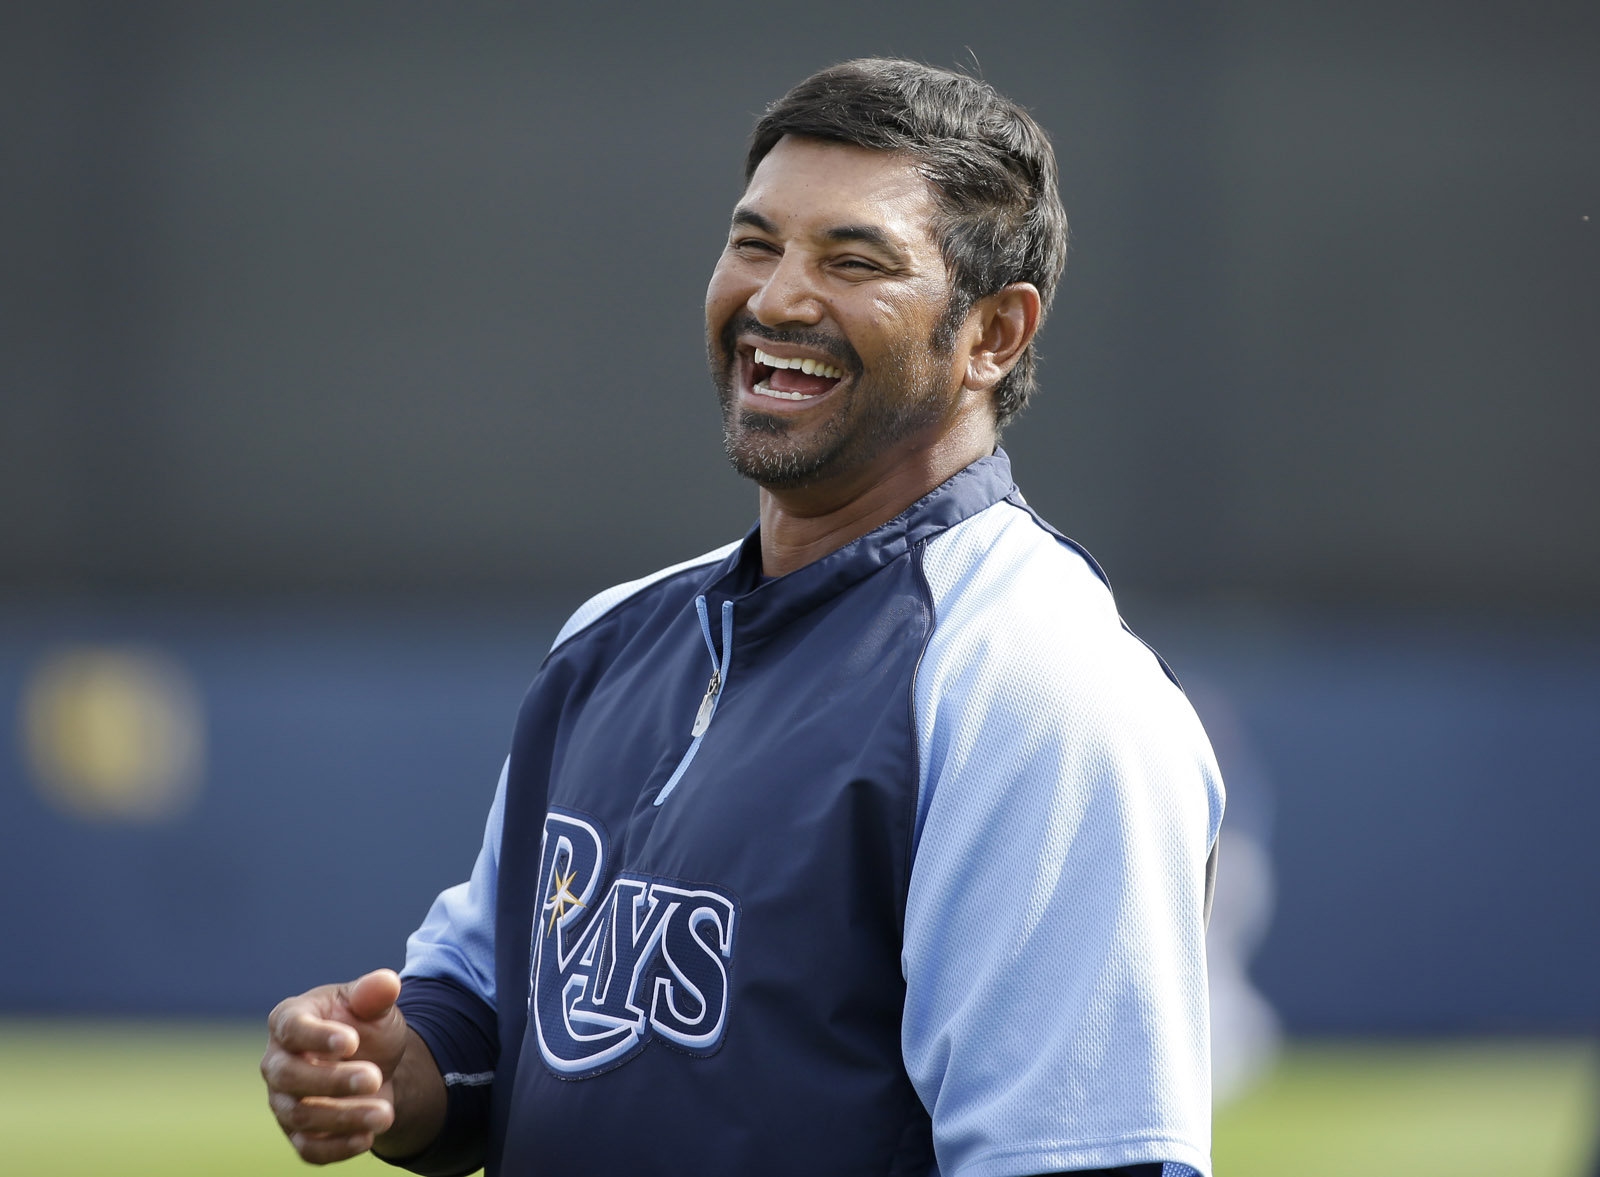 Tampa Bay Rays coach Dave Martinez jokes around before an exhibition baseball game against the New York Yankees, Wednesday, March 5, 2014, in Port Charlotte, Fla. (AP Photo/Steven Senne)